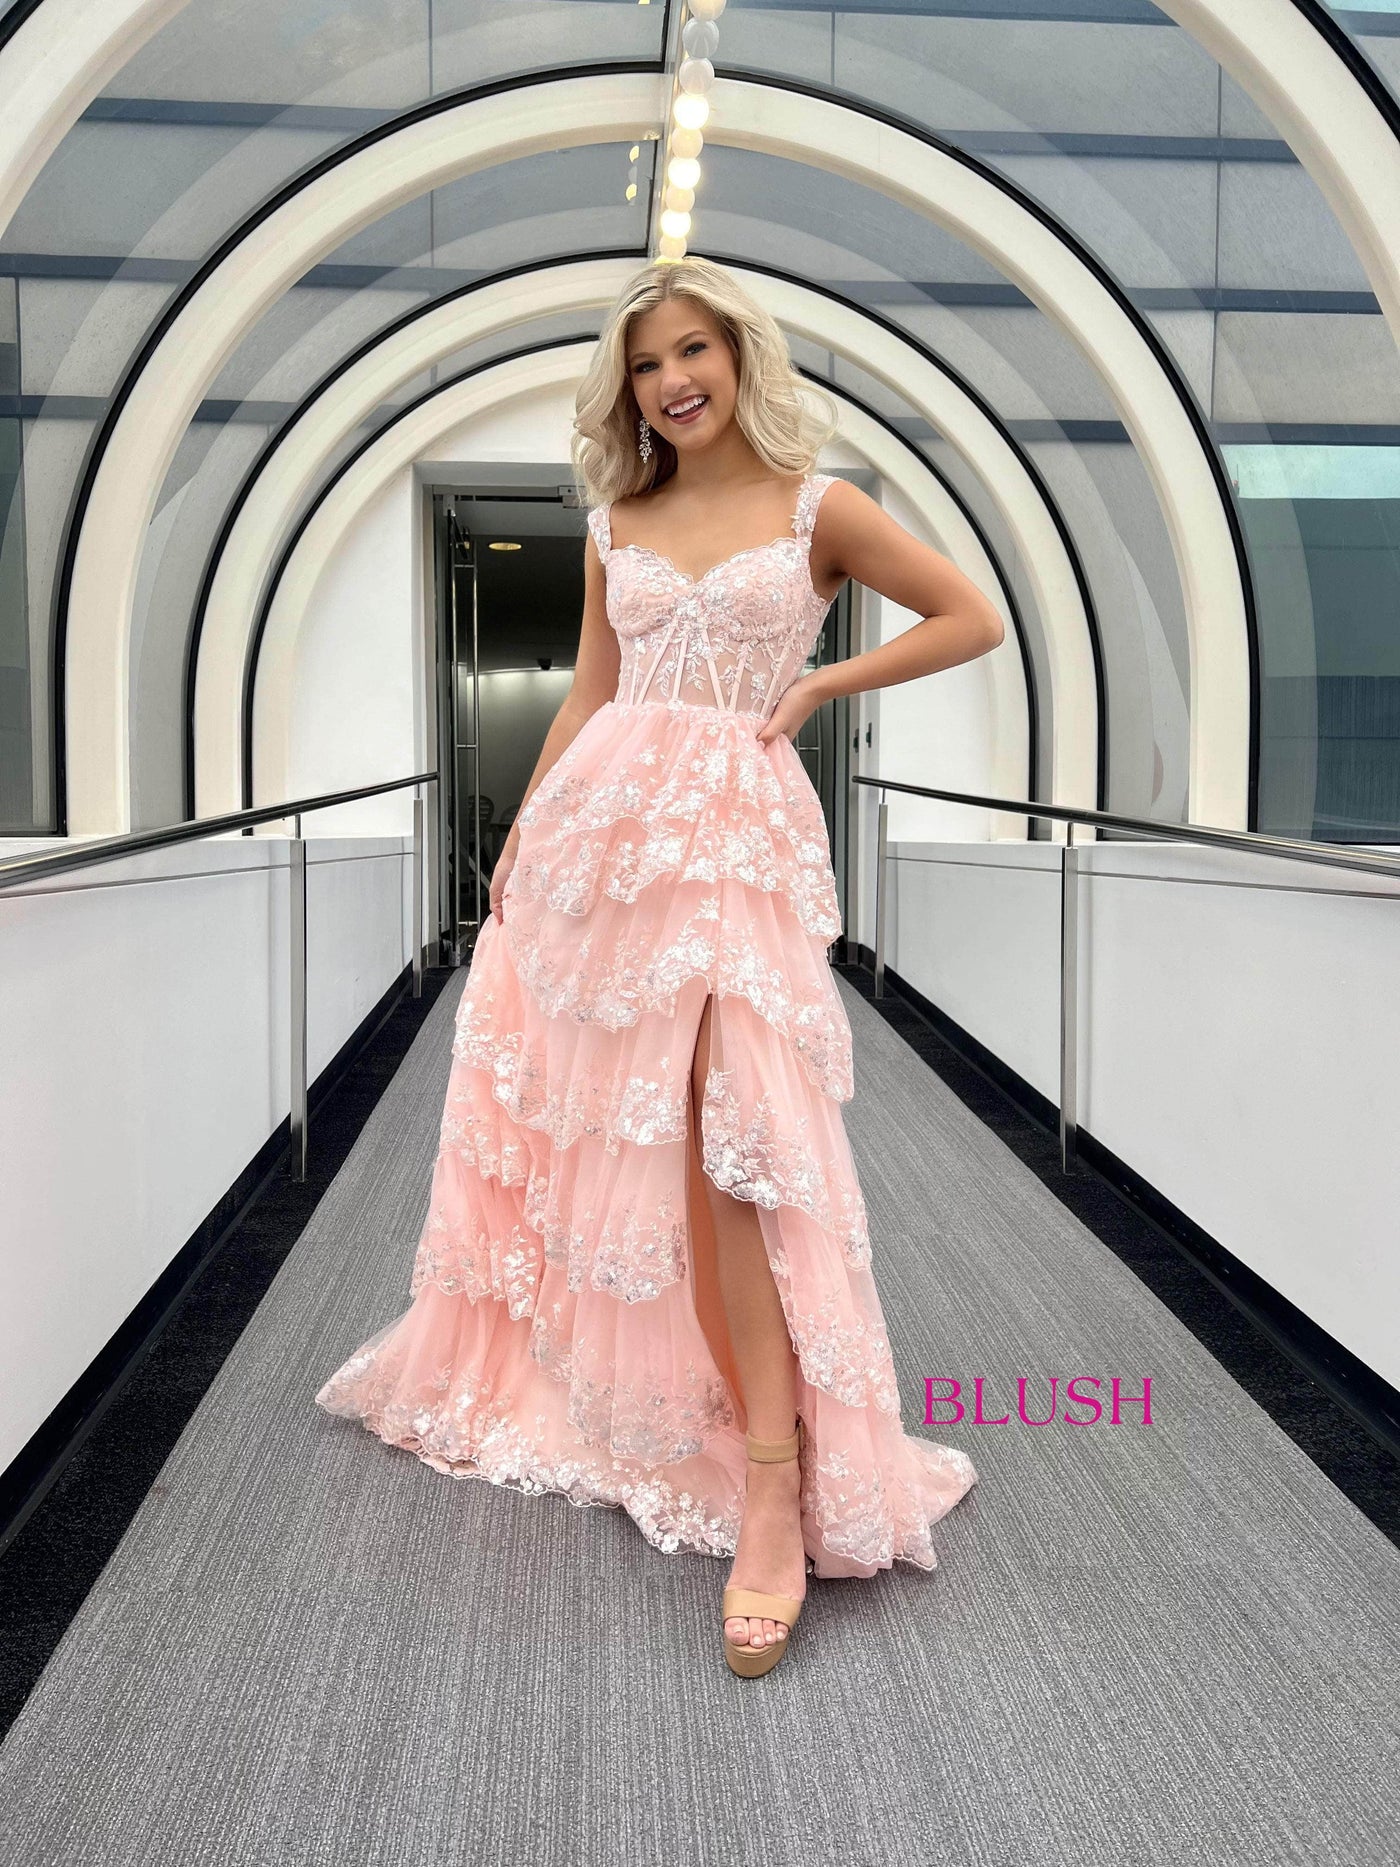 Blush by Alexia Designs 12177 - Tiered A-Line Prom DressSpecial Occasion Dress